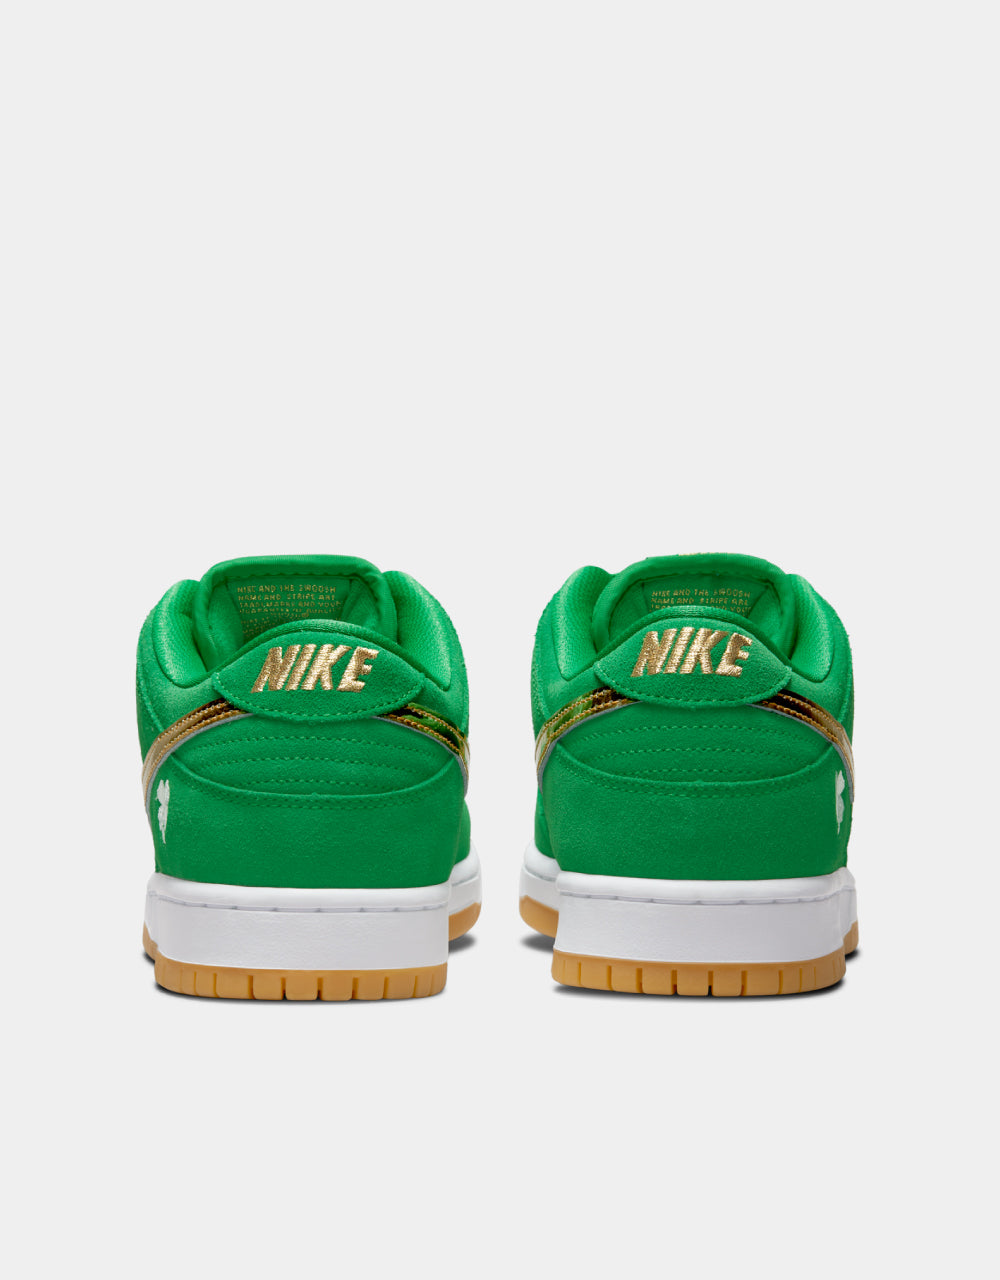 Nike SB 'Lucky' Dunk Low Pro Skate Shoes